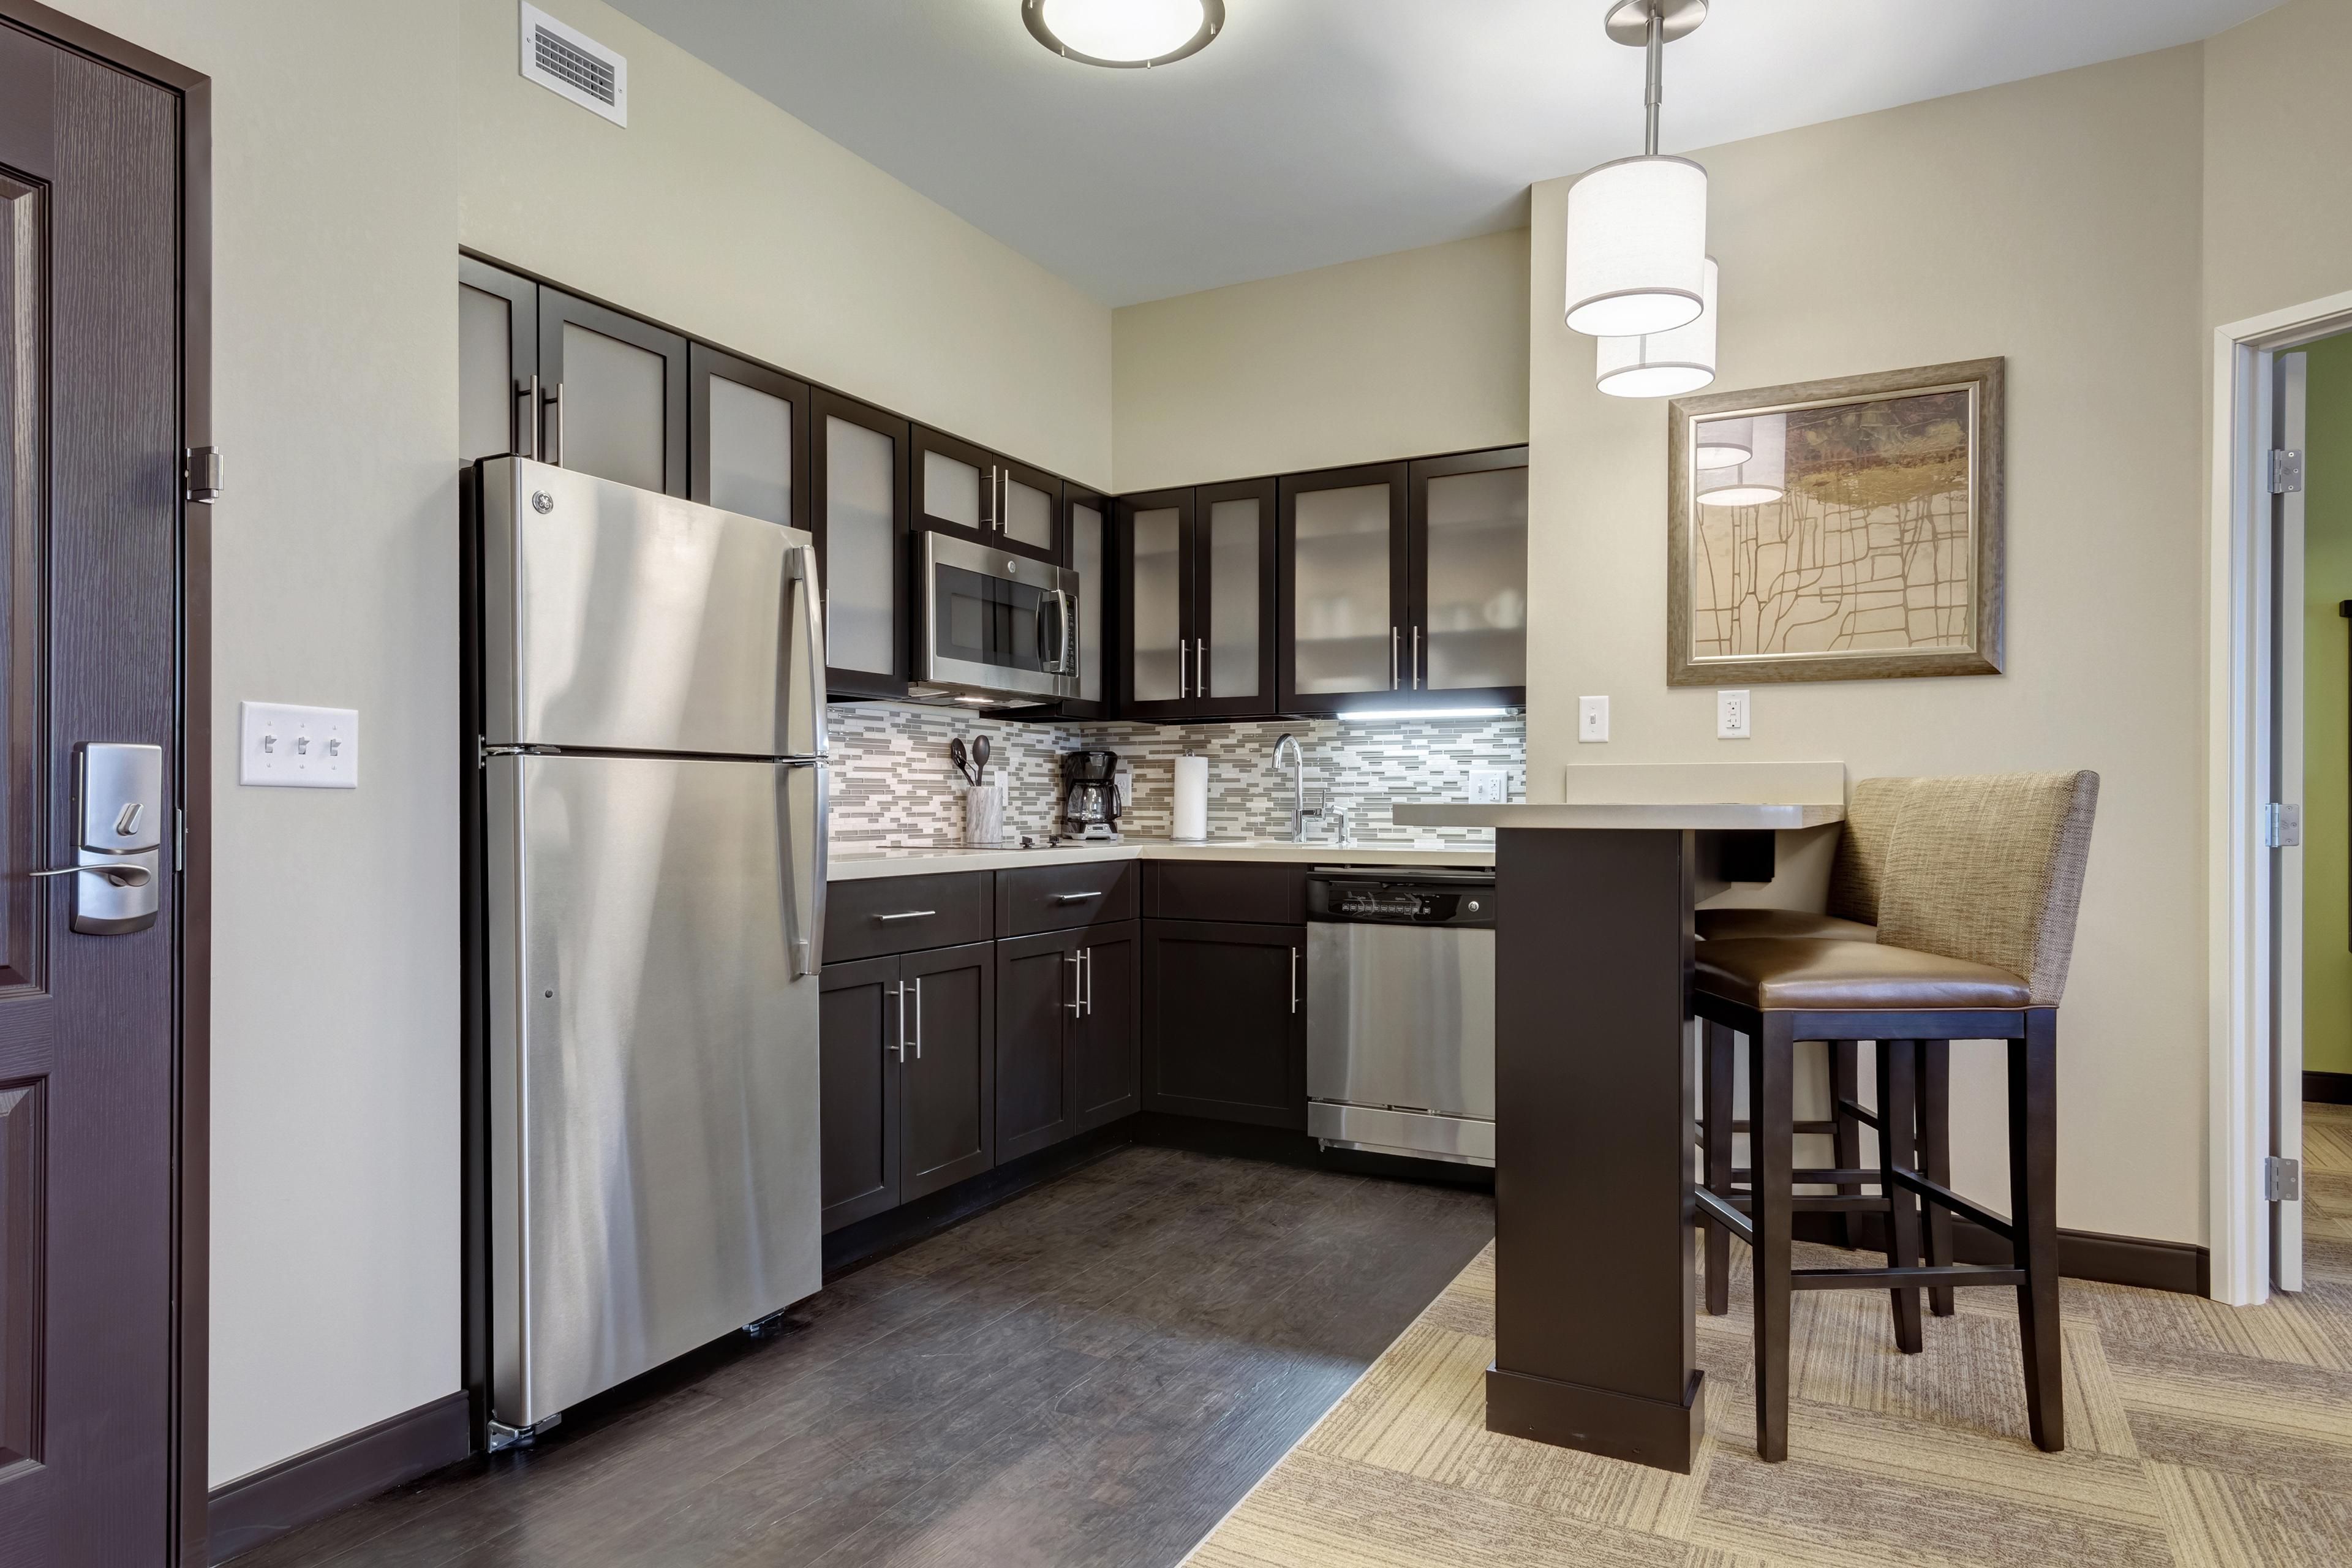 Every room in our property includes a kitchenette equipped with a full sized refrigerator, dual stove top burner, coffee maker, dish washer, microwave, toaster, dining ware, flat ware, and cooking utensils. Enjoy the comfort of a home cooked meal away from home! 